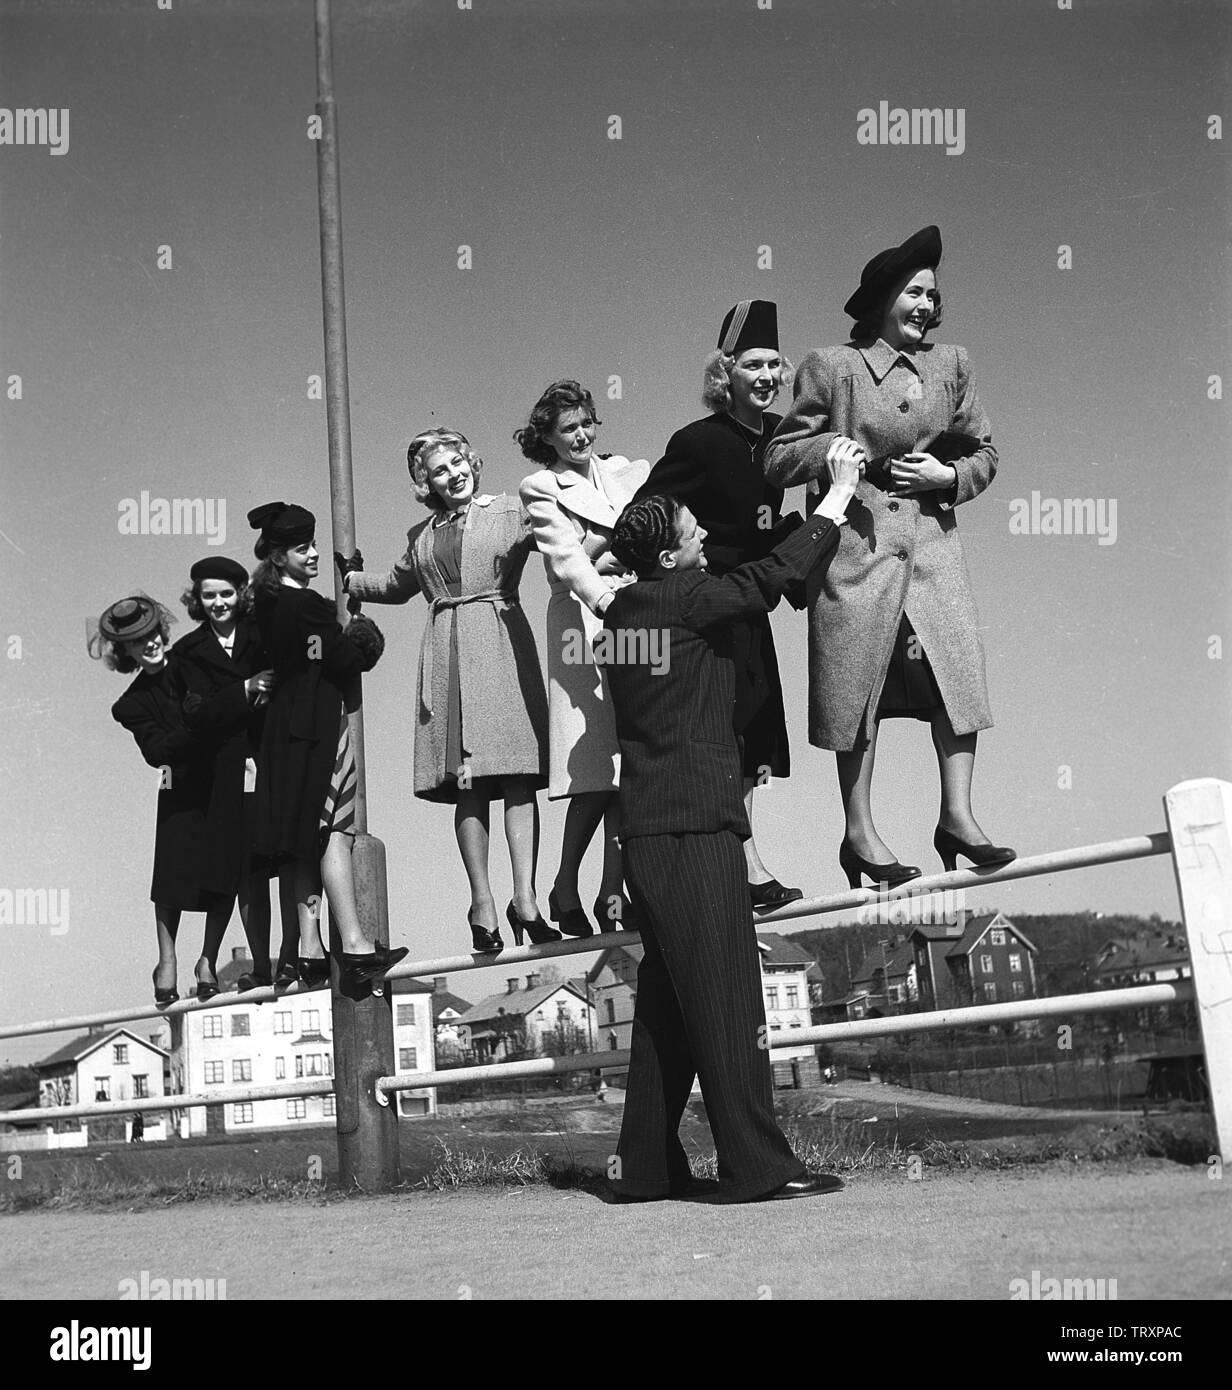 Women of the 1940s. Seven young women are balancing on a fence. A man is giving a hand. Picture taken in the town Borås where the saying is that there is a shortage of single men.  Only one free and single man on seven women.  Sweden 1942. Photo Kristoffersson ref A42-5 Stock Photo